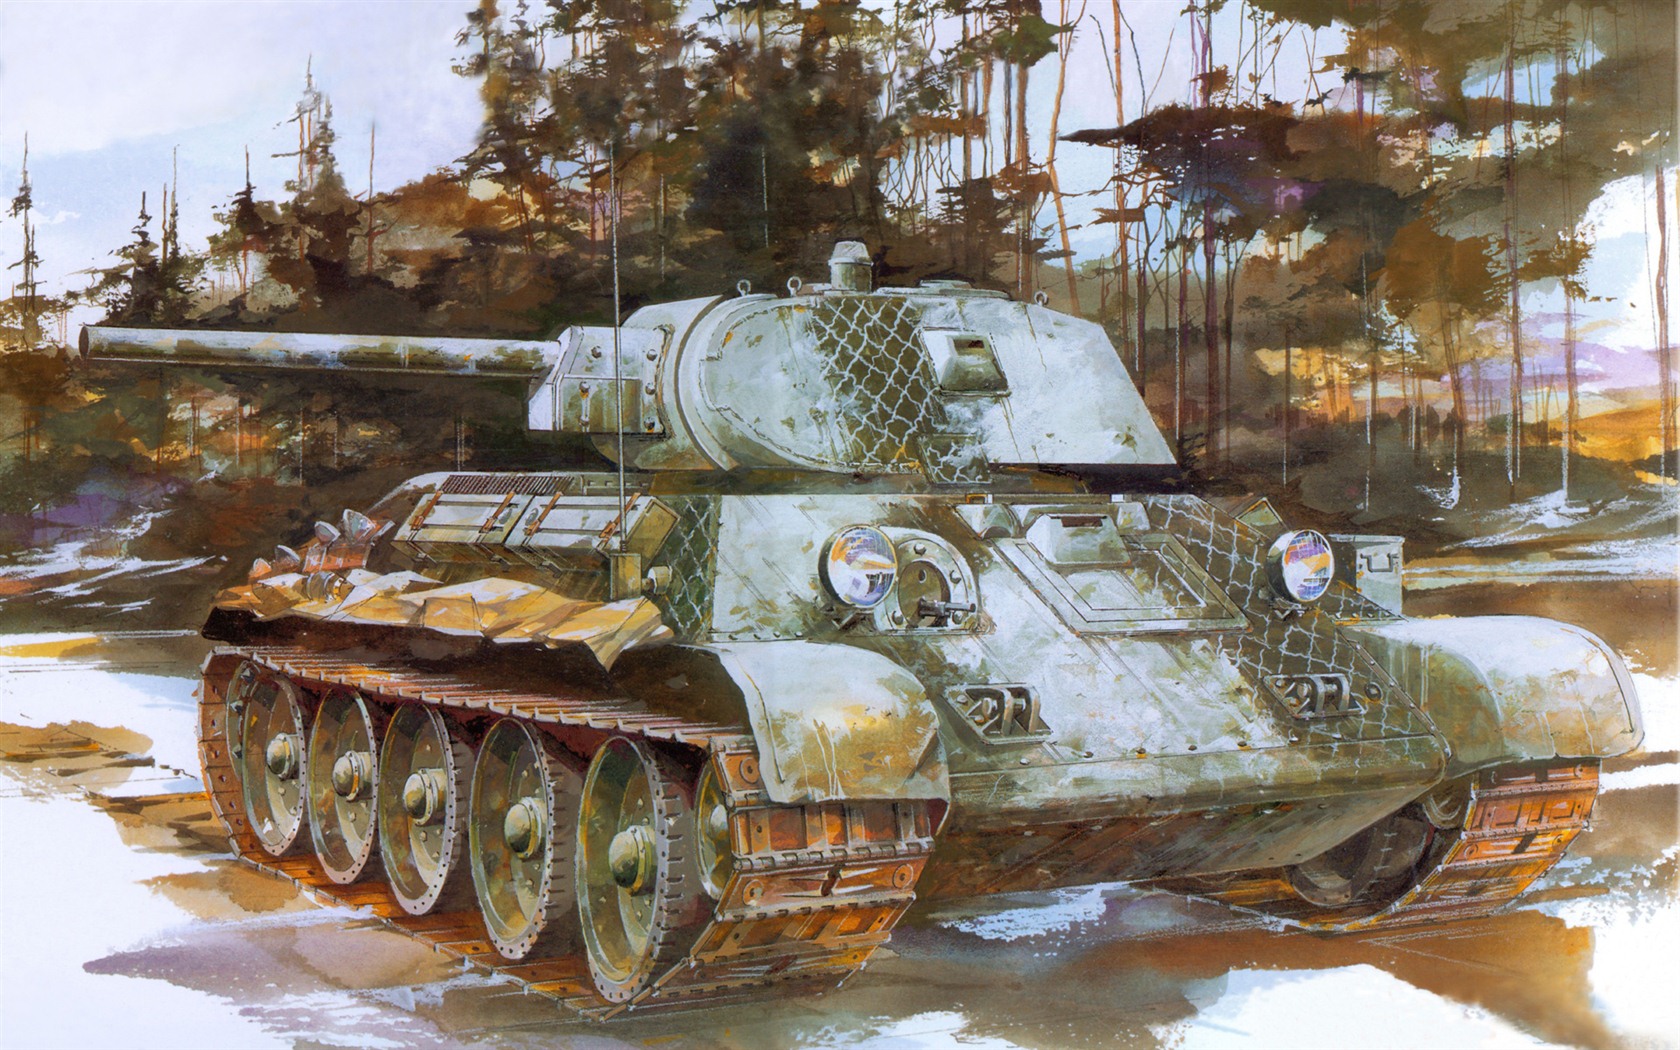 Military tanks, armored HD painting wallpapers #8 - 1680x1050